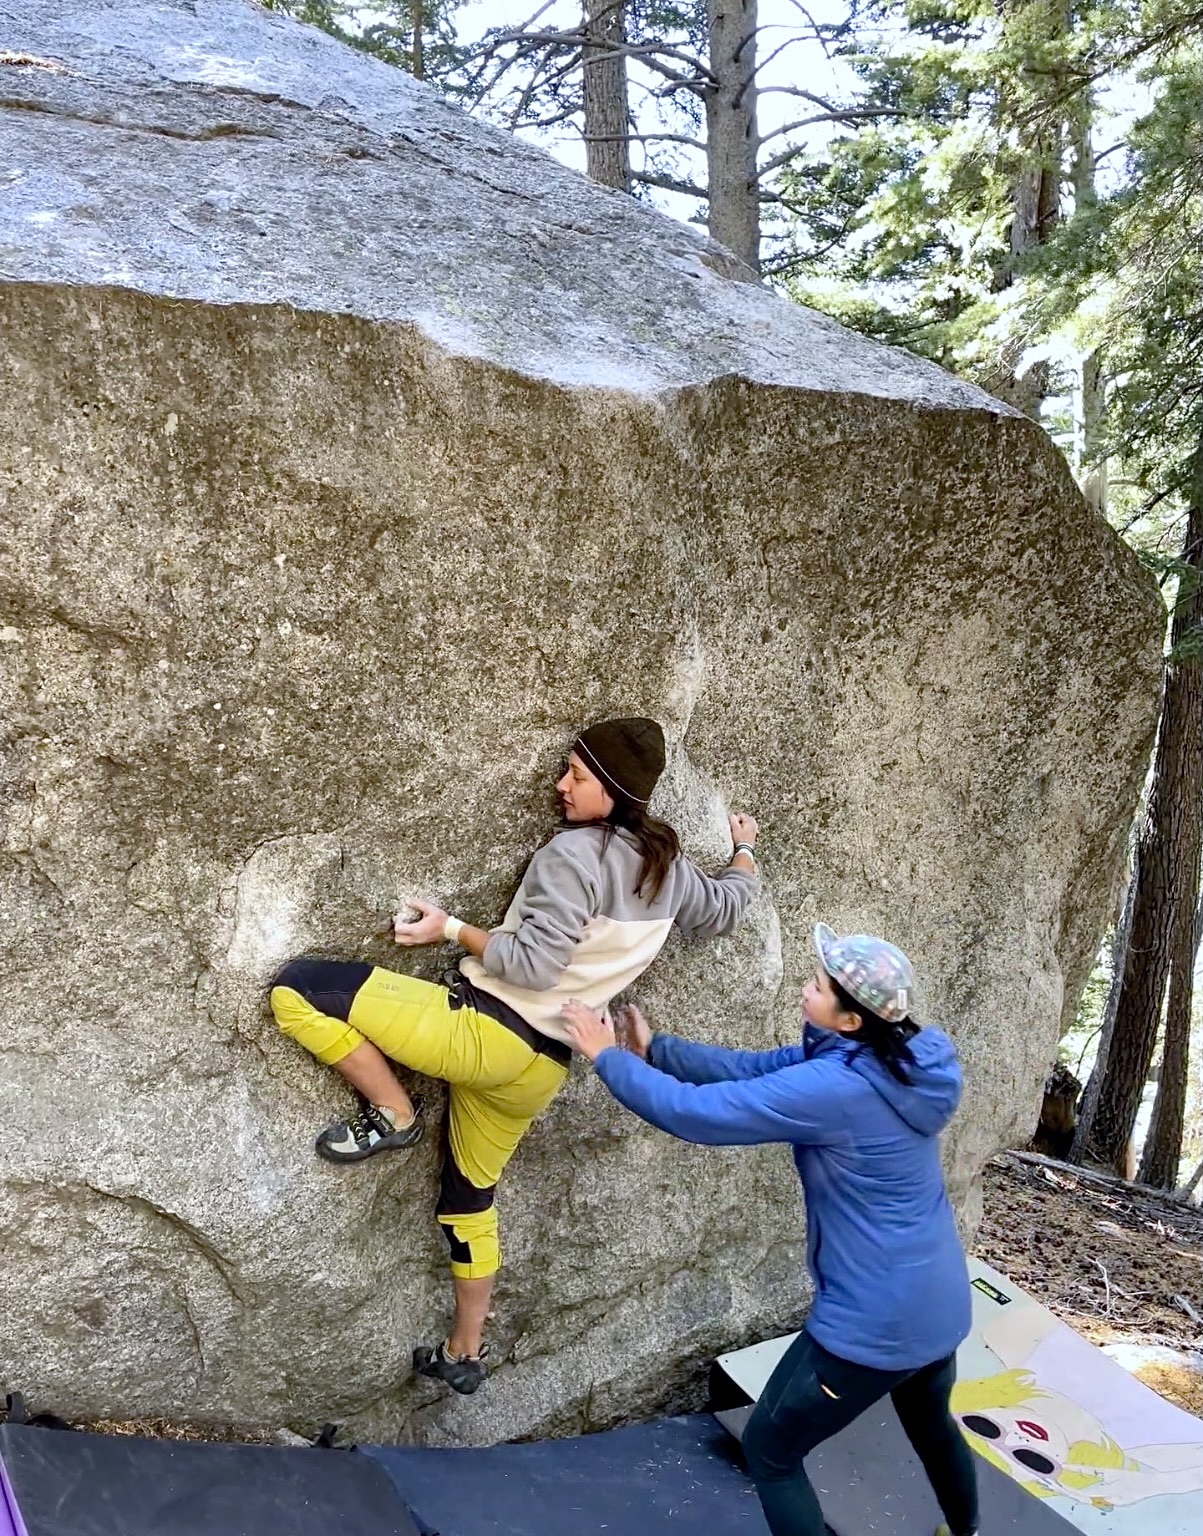 You know you're a granite climber when you full-crimp the shit out of a tiny crystal on a sloper! Slopers and Dopers v4